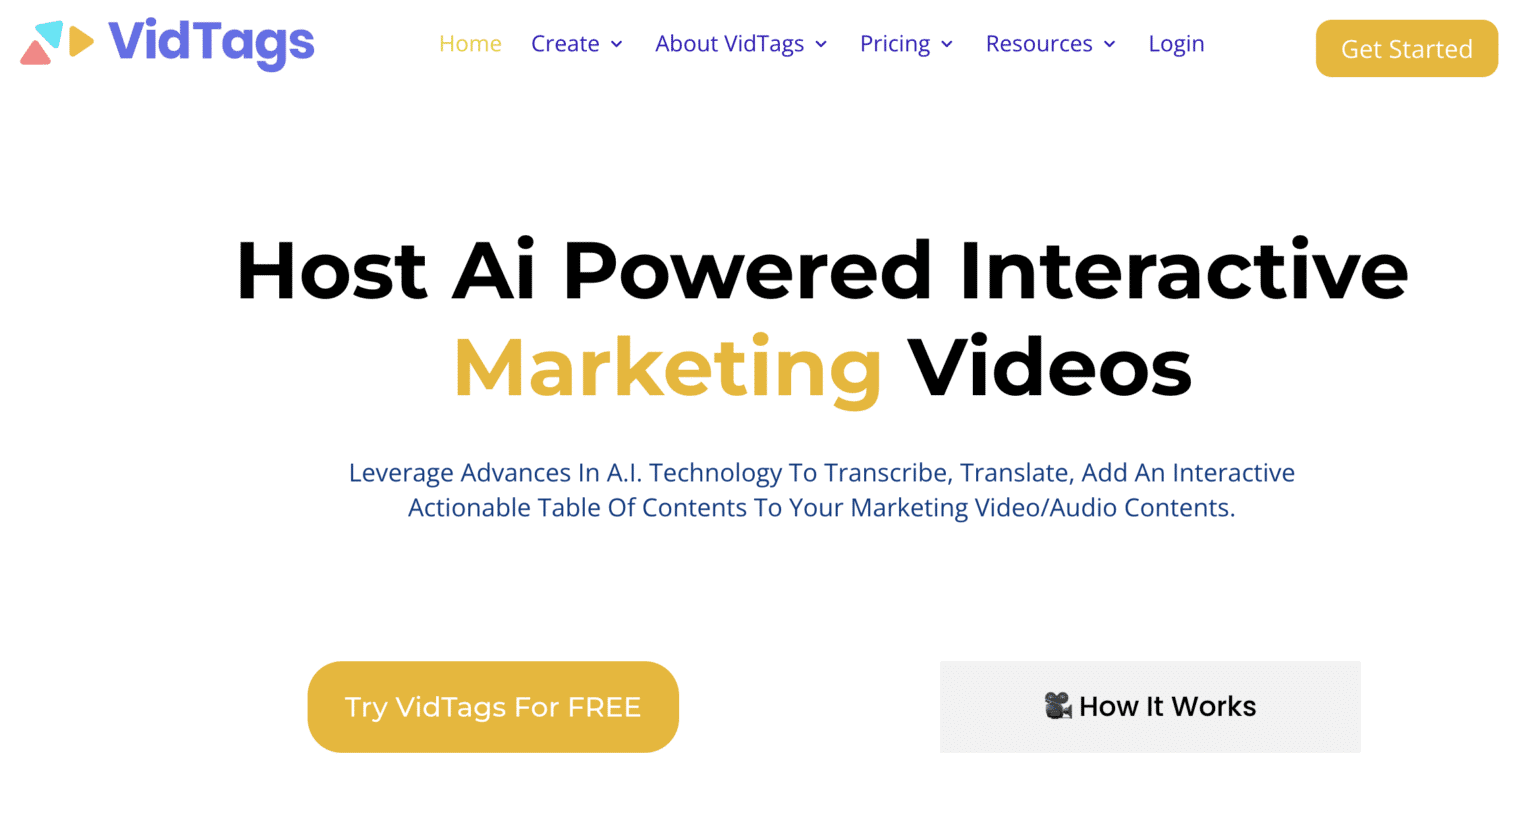 Host Ai Powered Interactive Marketing Videos Using Vidtags, The Ai Auto Translate Tool That Converts Video Audio To Text For Enhanced Accessibility And A Lifetime Deal Worth Considering.